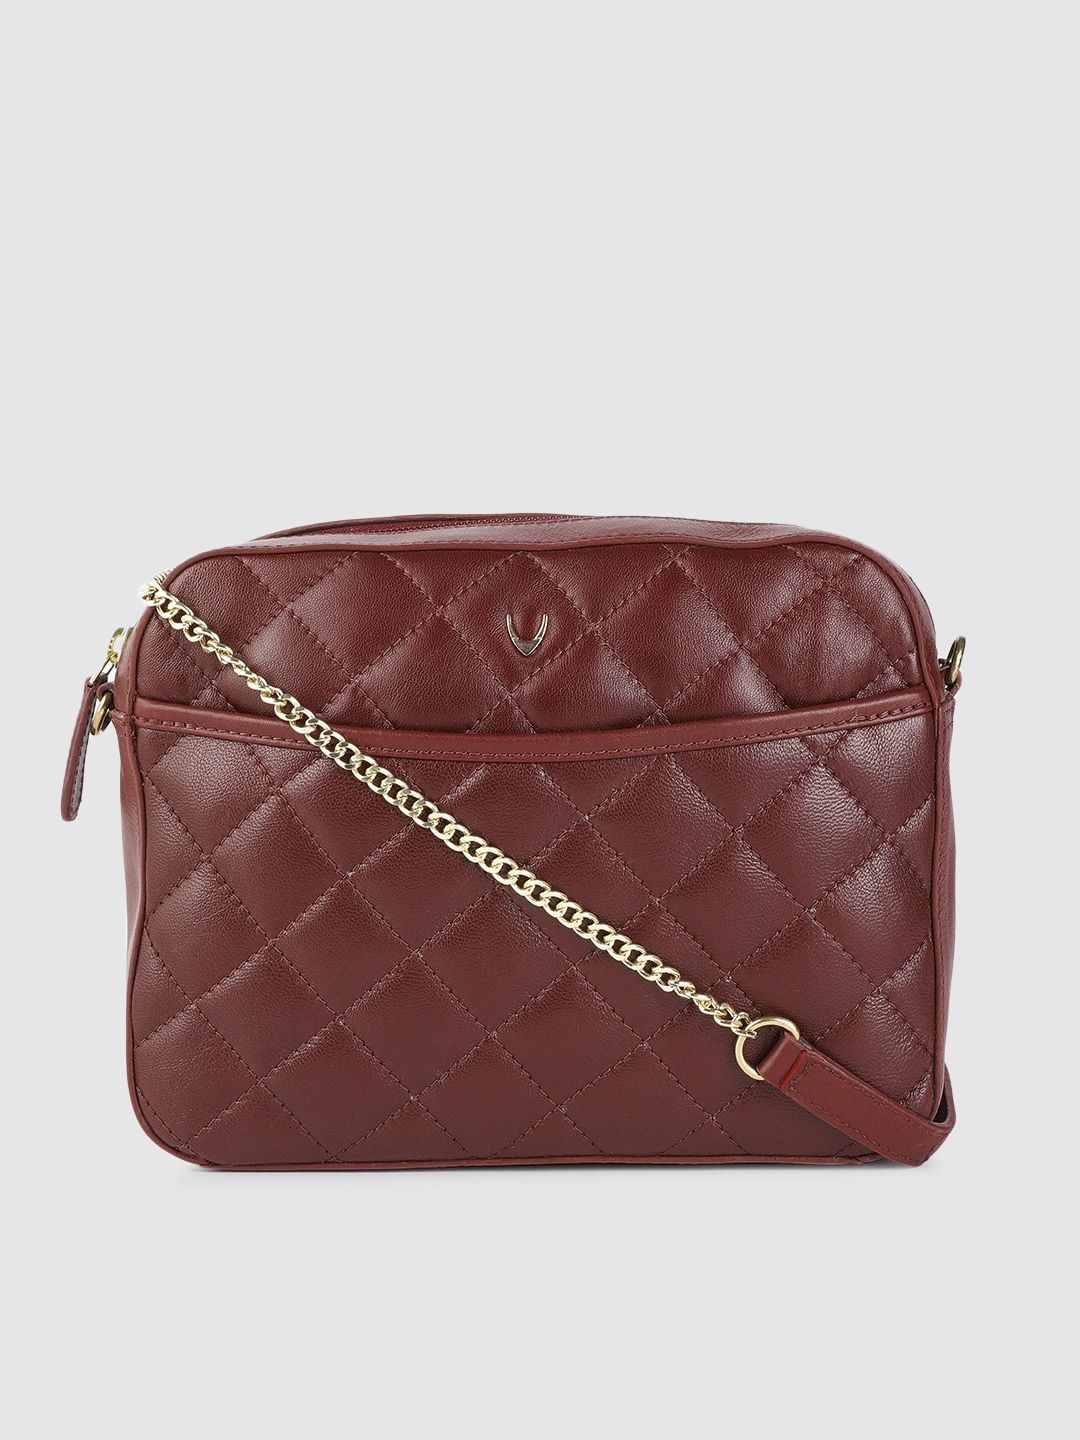 Hidesign Red Quilted Leather Sling Bag Price in India